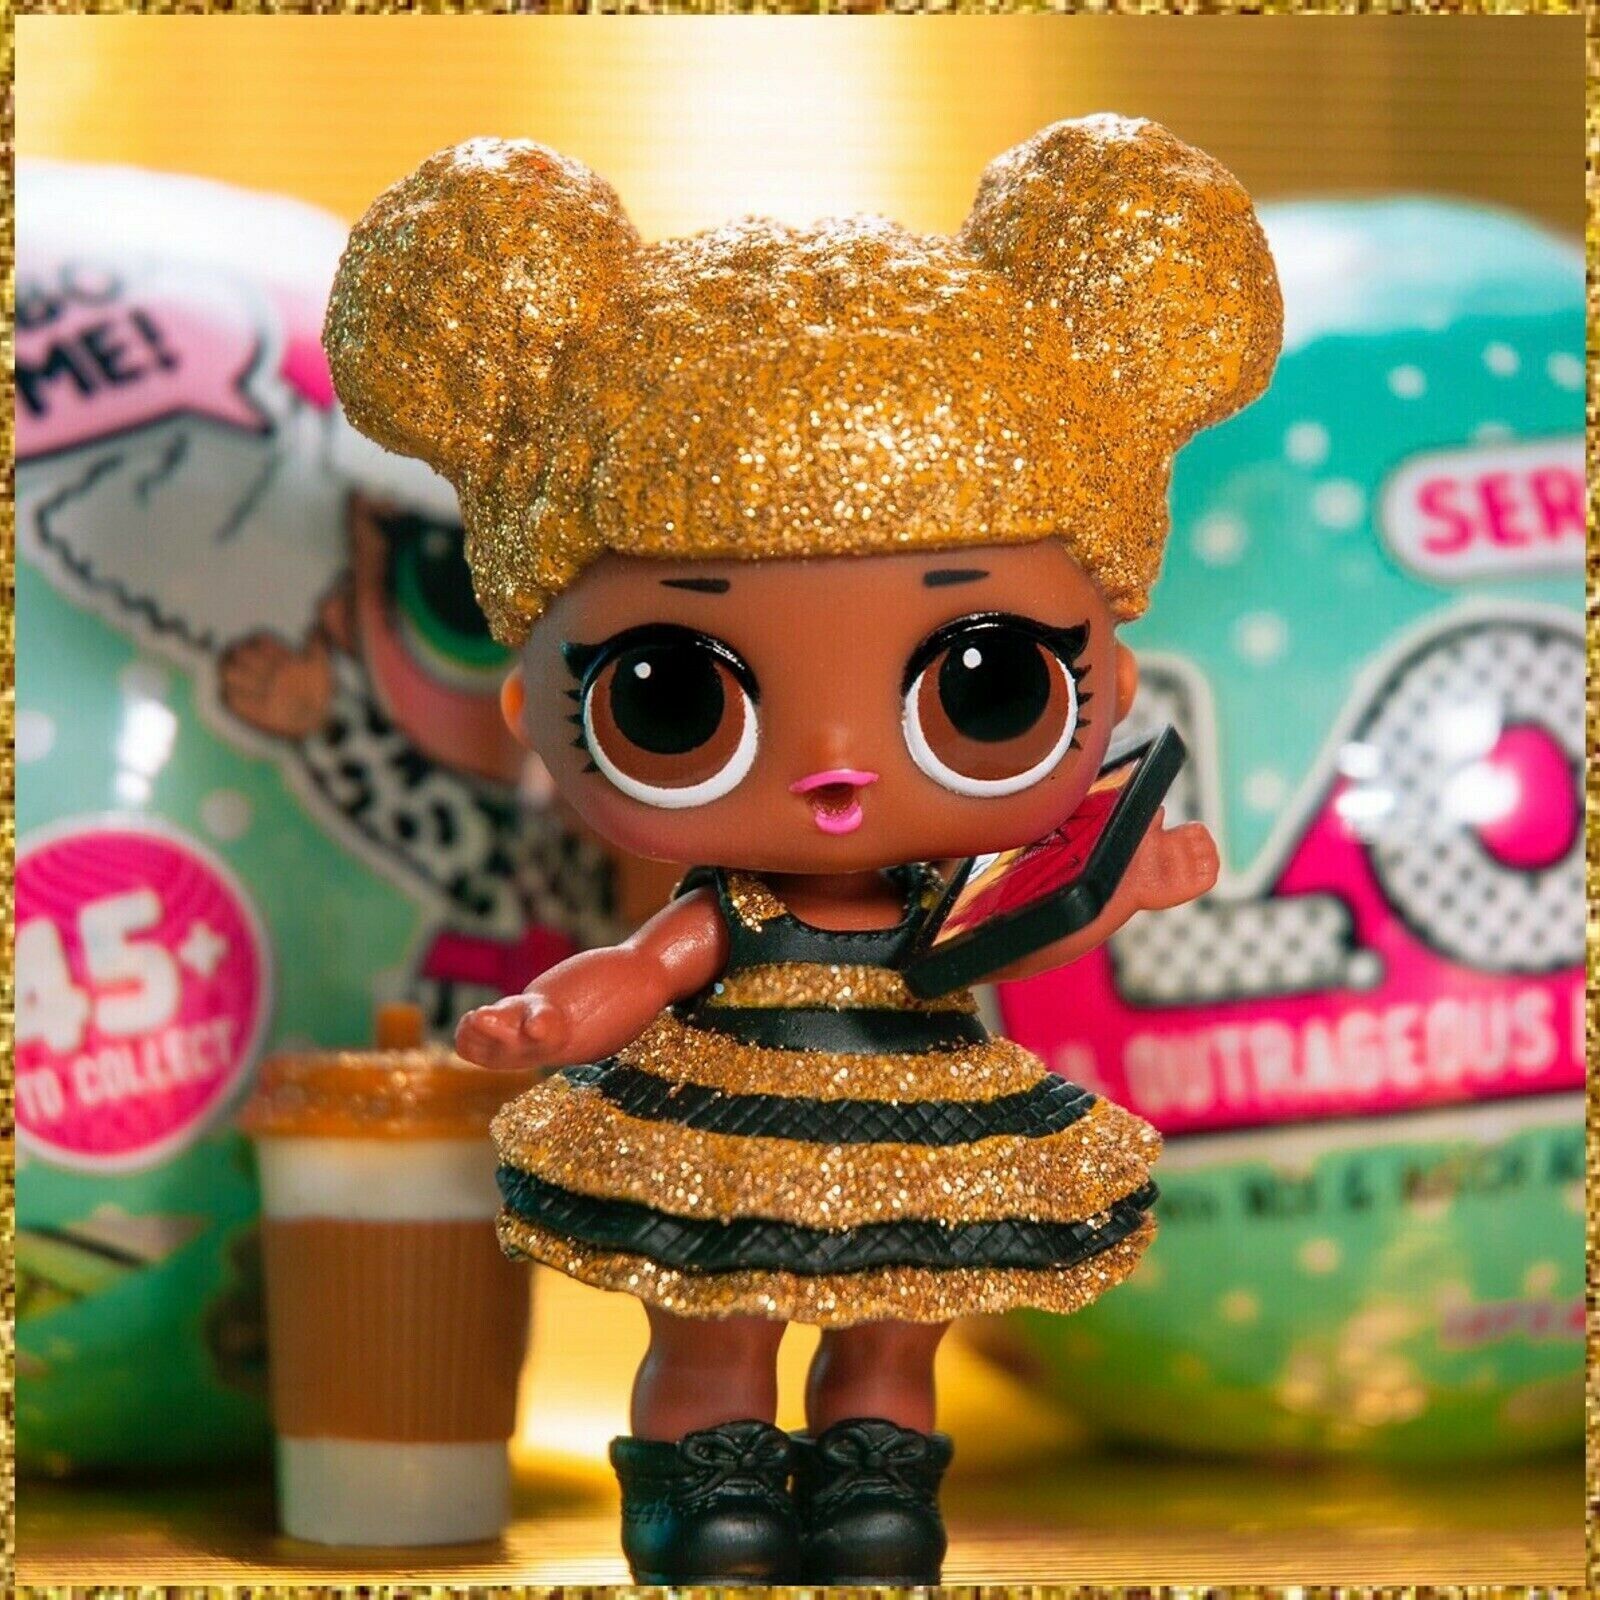 Details about   ORIGINAL Ultra Rare LOL Surprise Dolls Series 1 QUEEN BEE LILBig Sister 